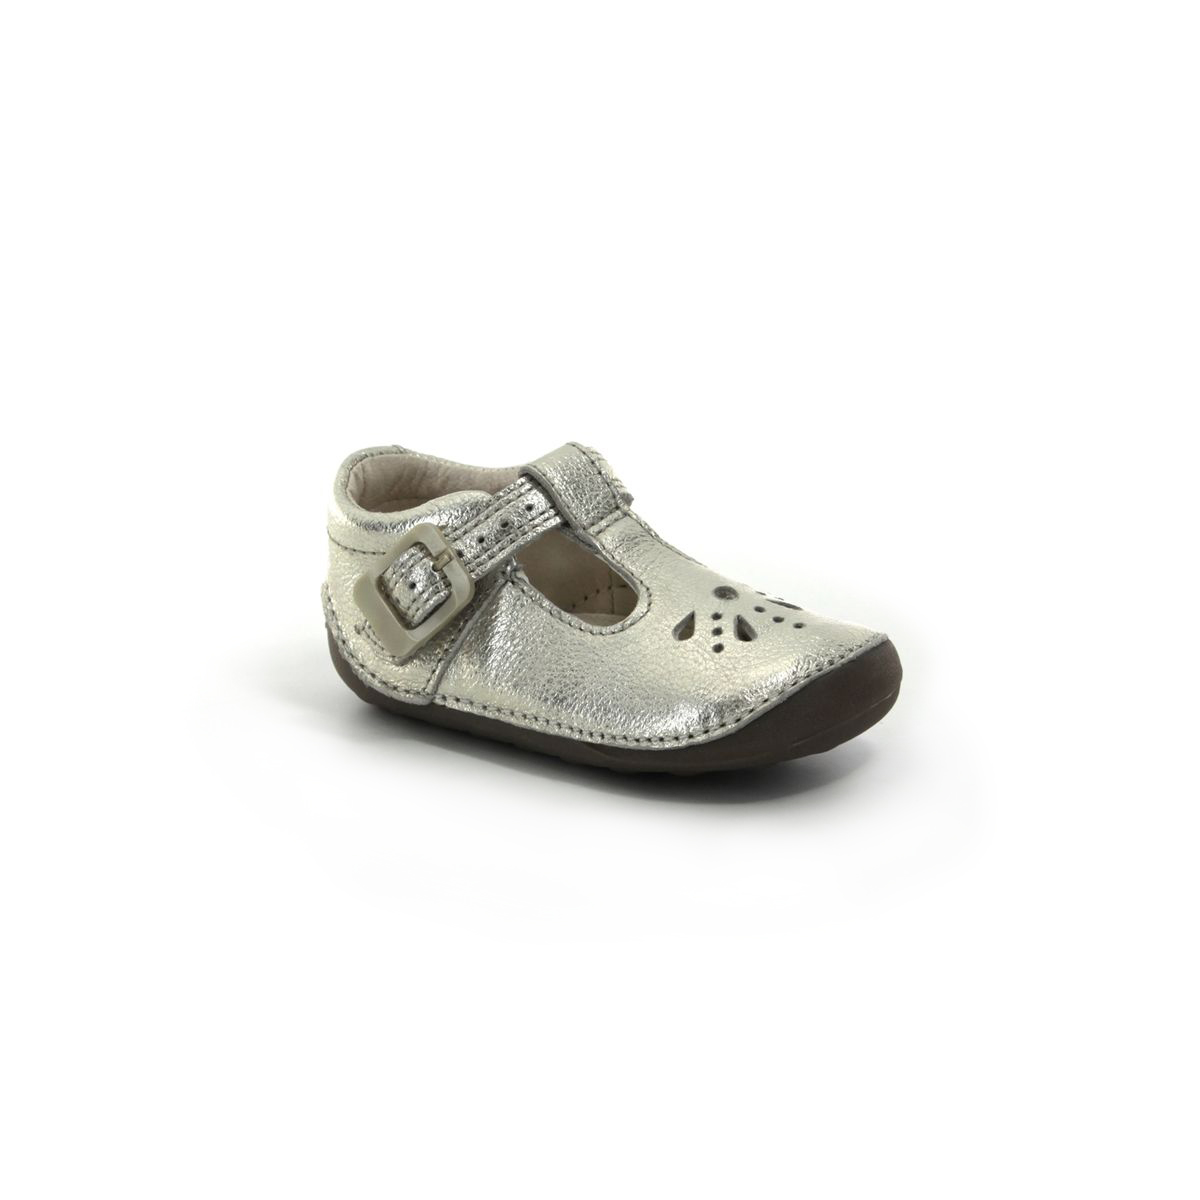 clarks baby first shoes